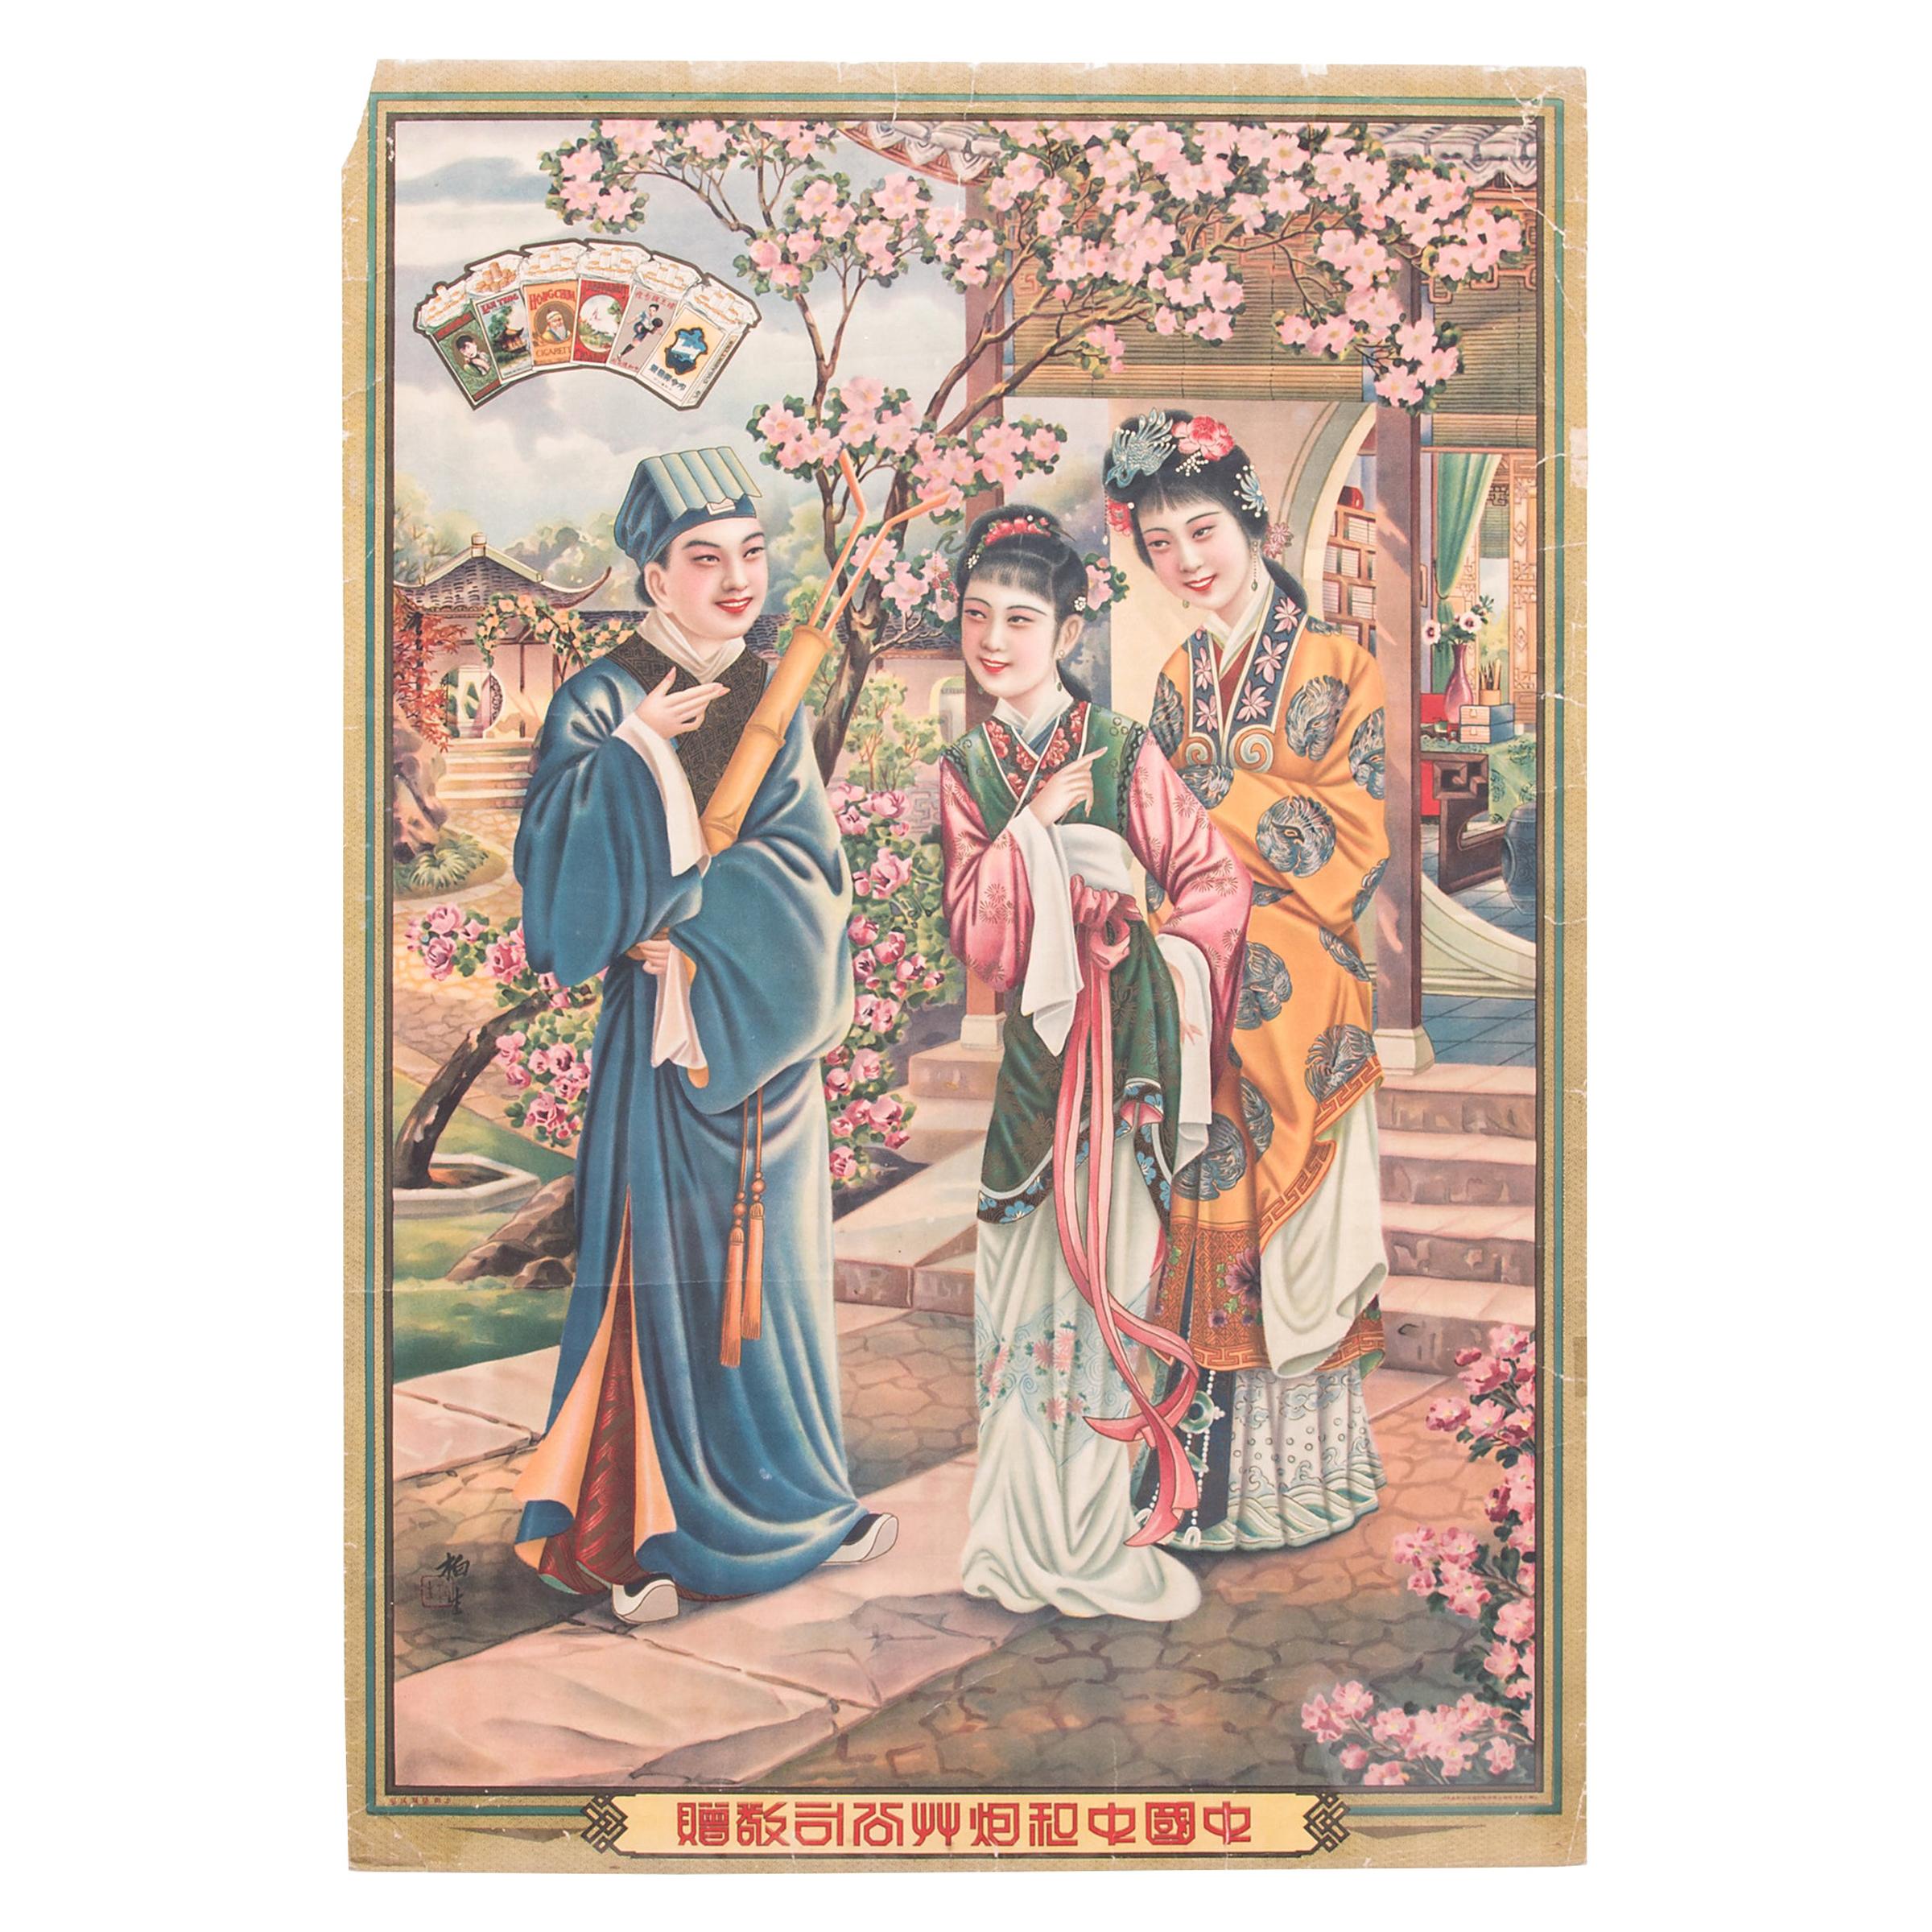 Vintage Chinese Cigarette Advertisement Poster